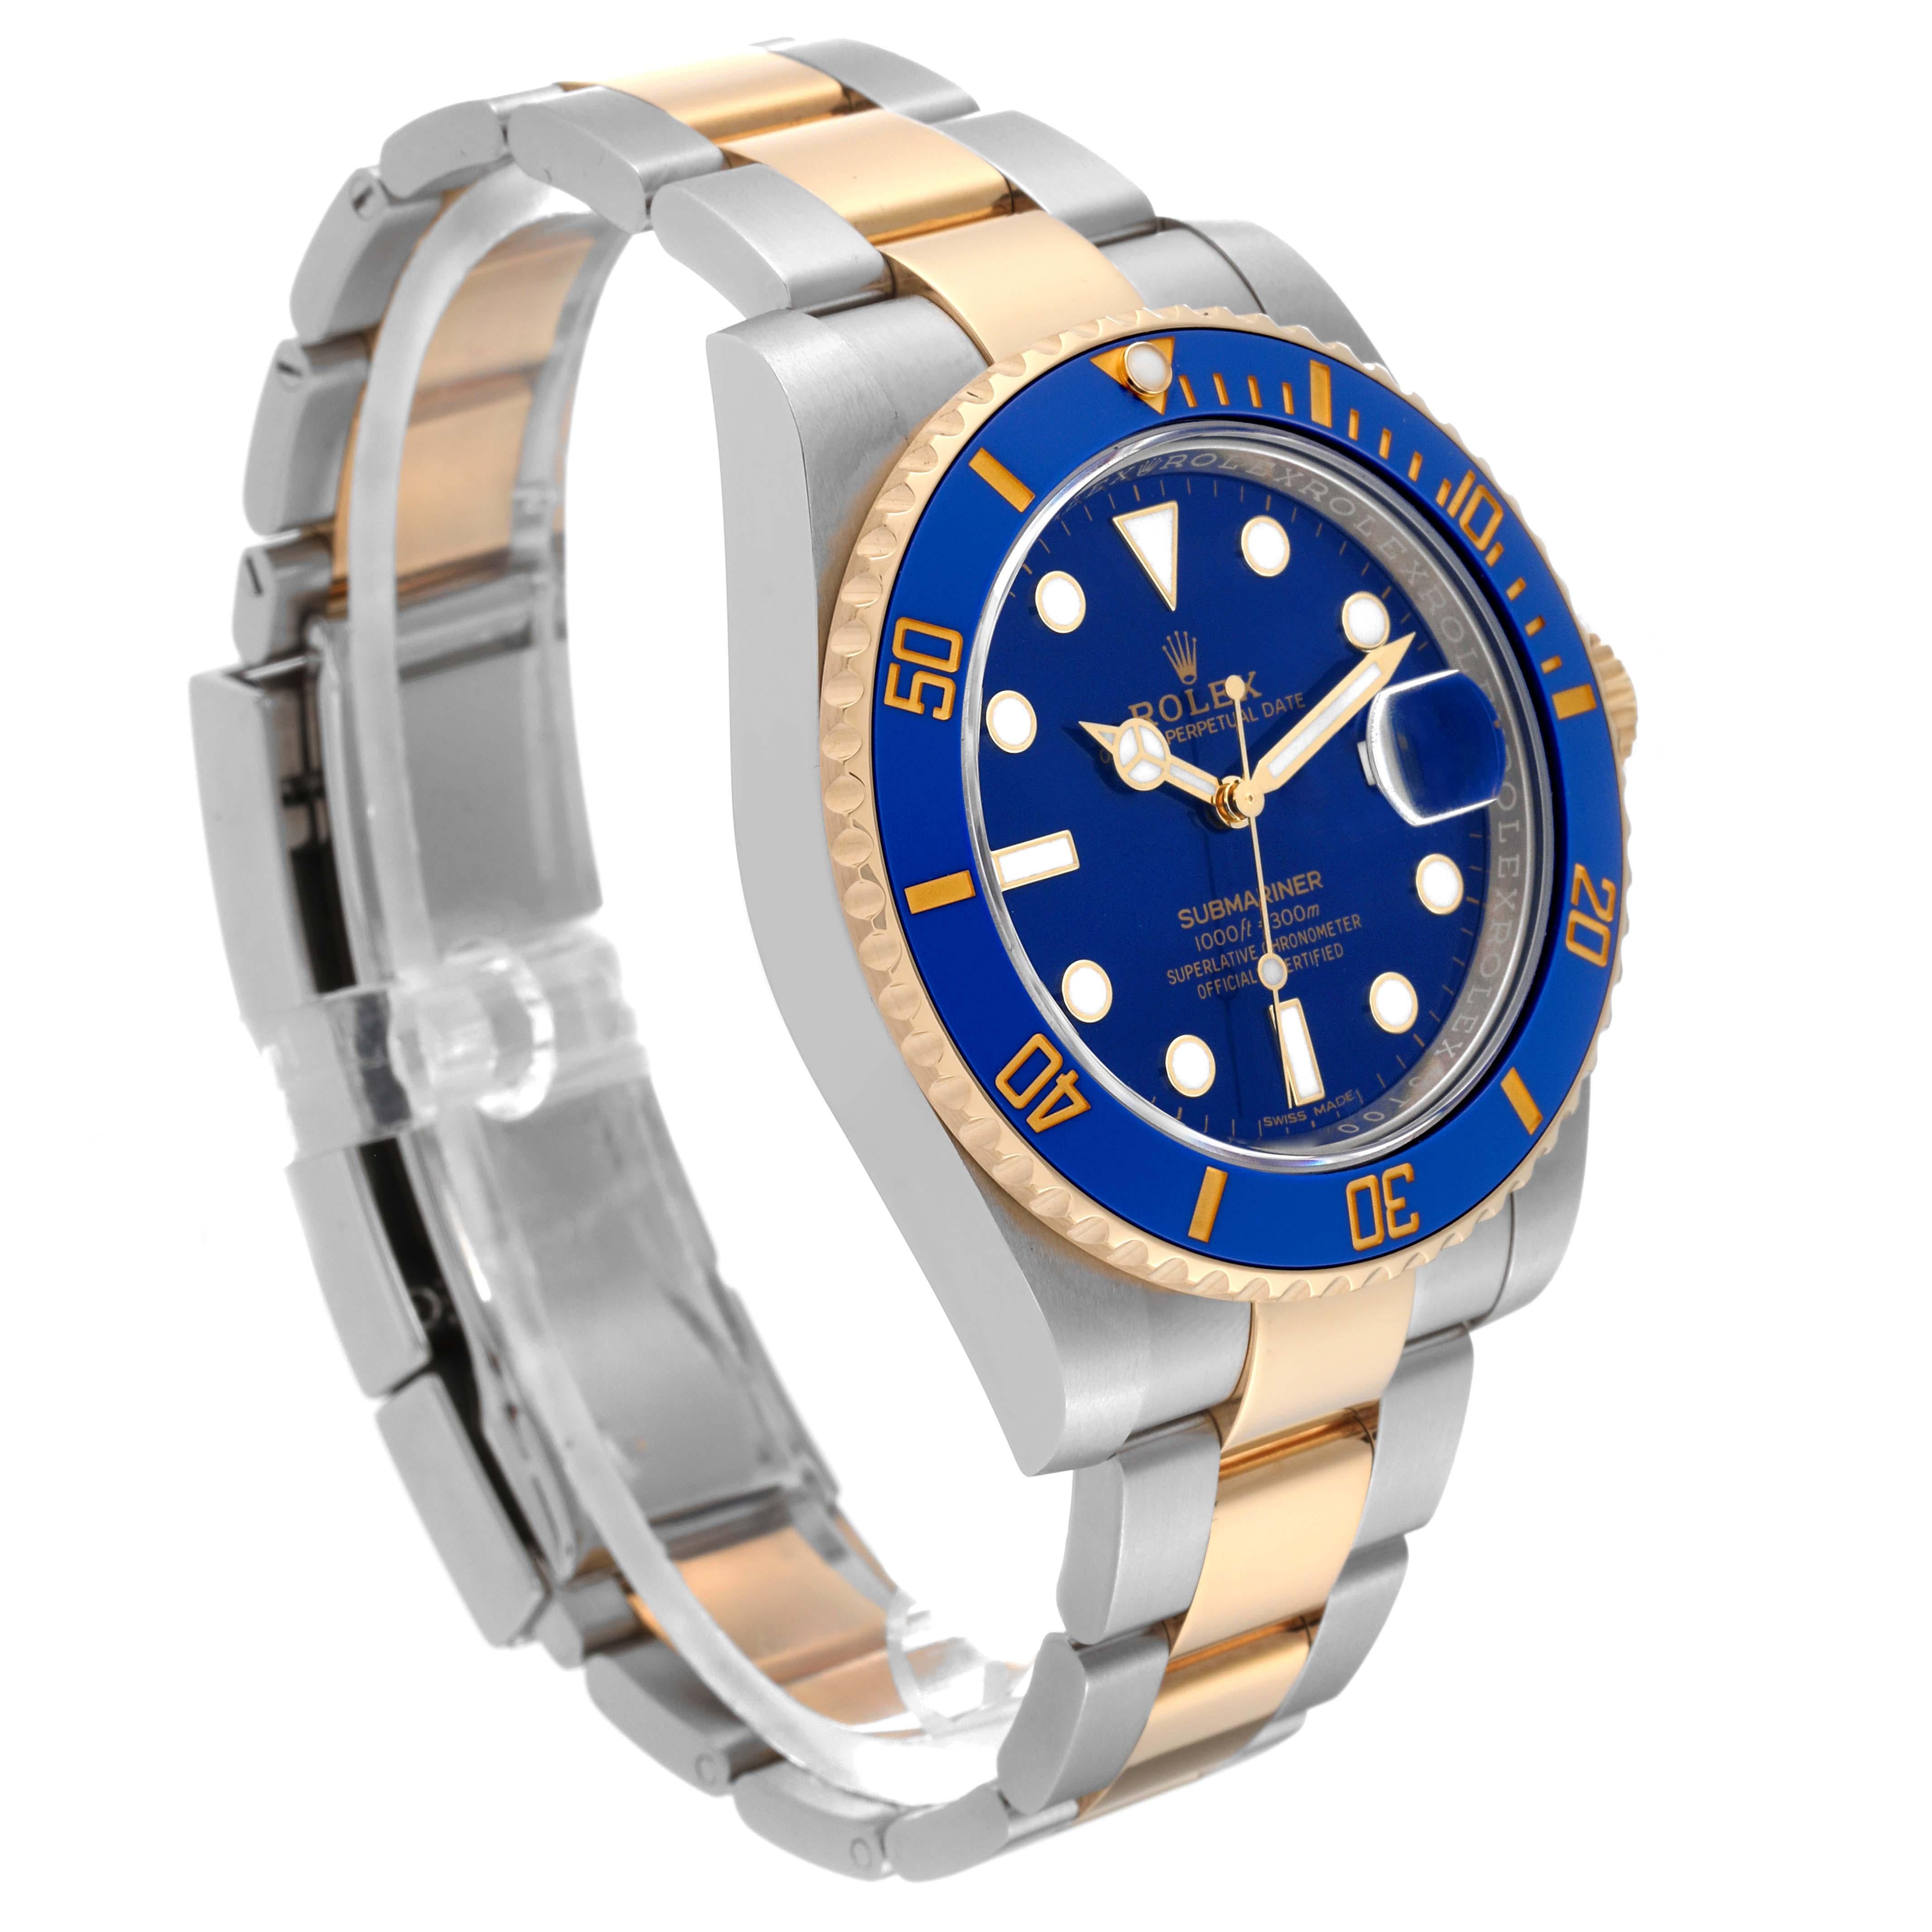 Rolex Submariner Steel Yellow Gold Blue Dial Mens Watch 116613 4